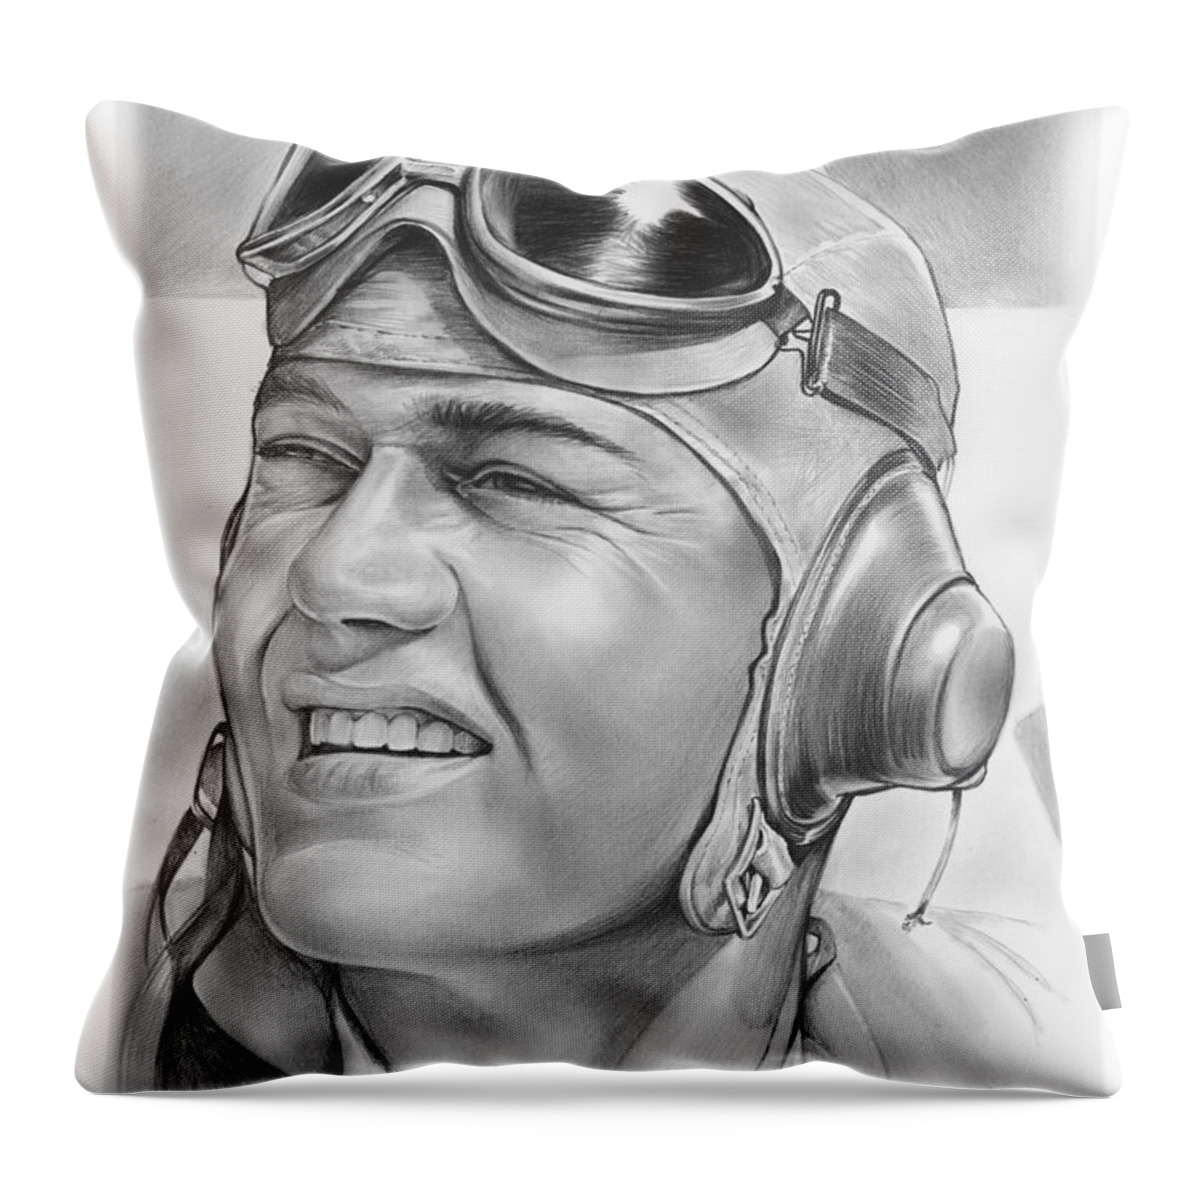 Hero Throw Pillow featuring the drawing Pappy Boyington by Greg Joens